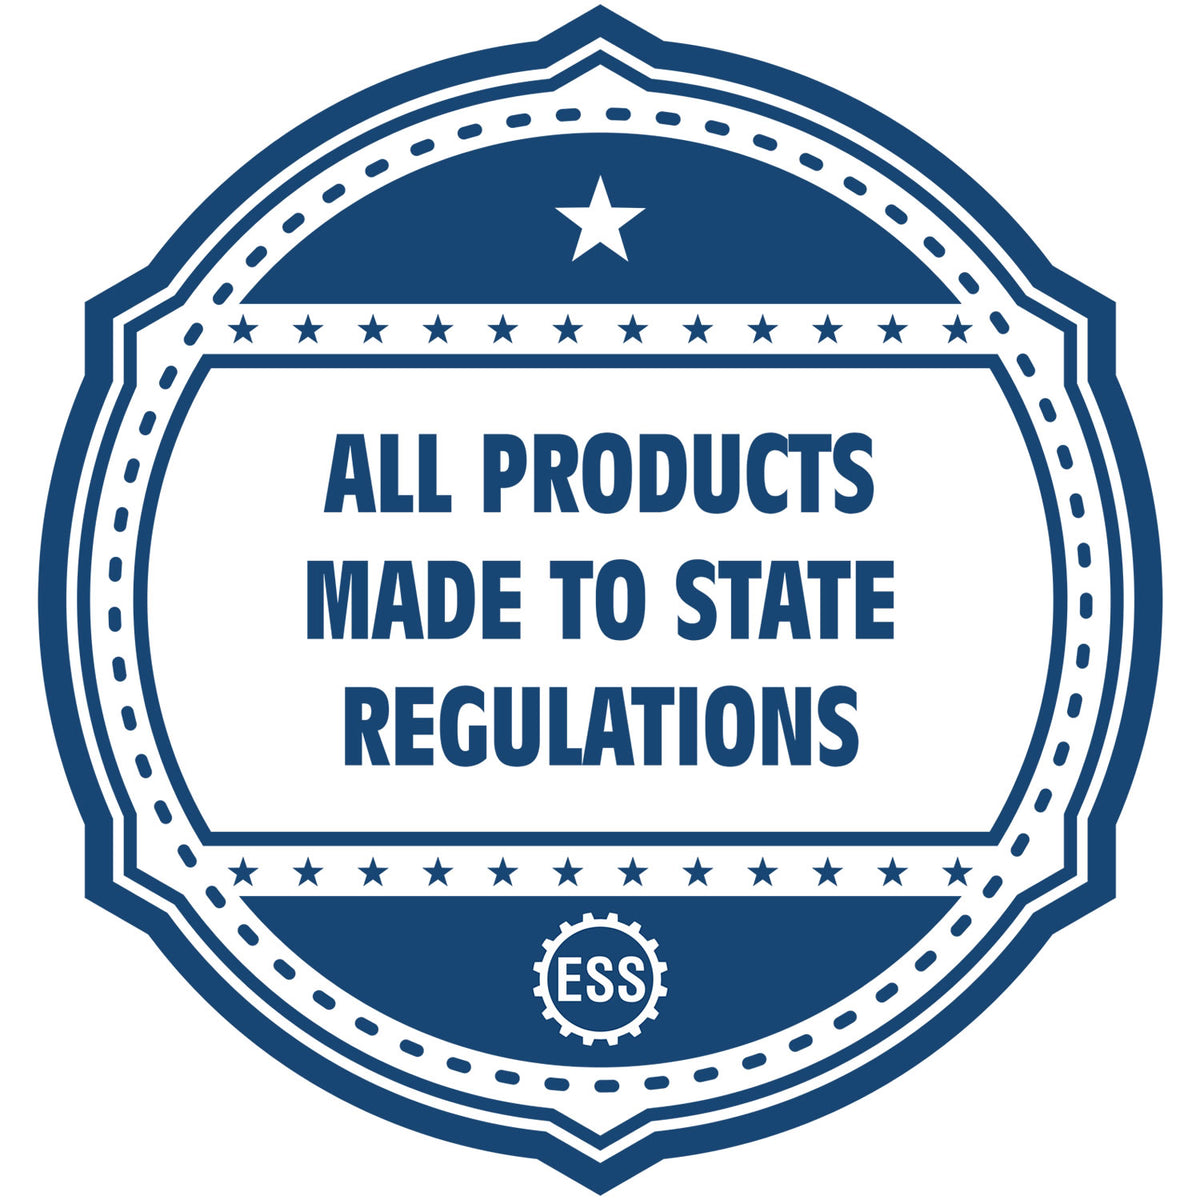 An icon or badge element for the Handheld South Dakota Professional Engineer Embosser showing that this product is made in compliance with state regulations.